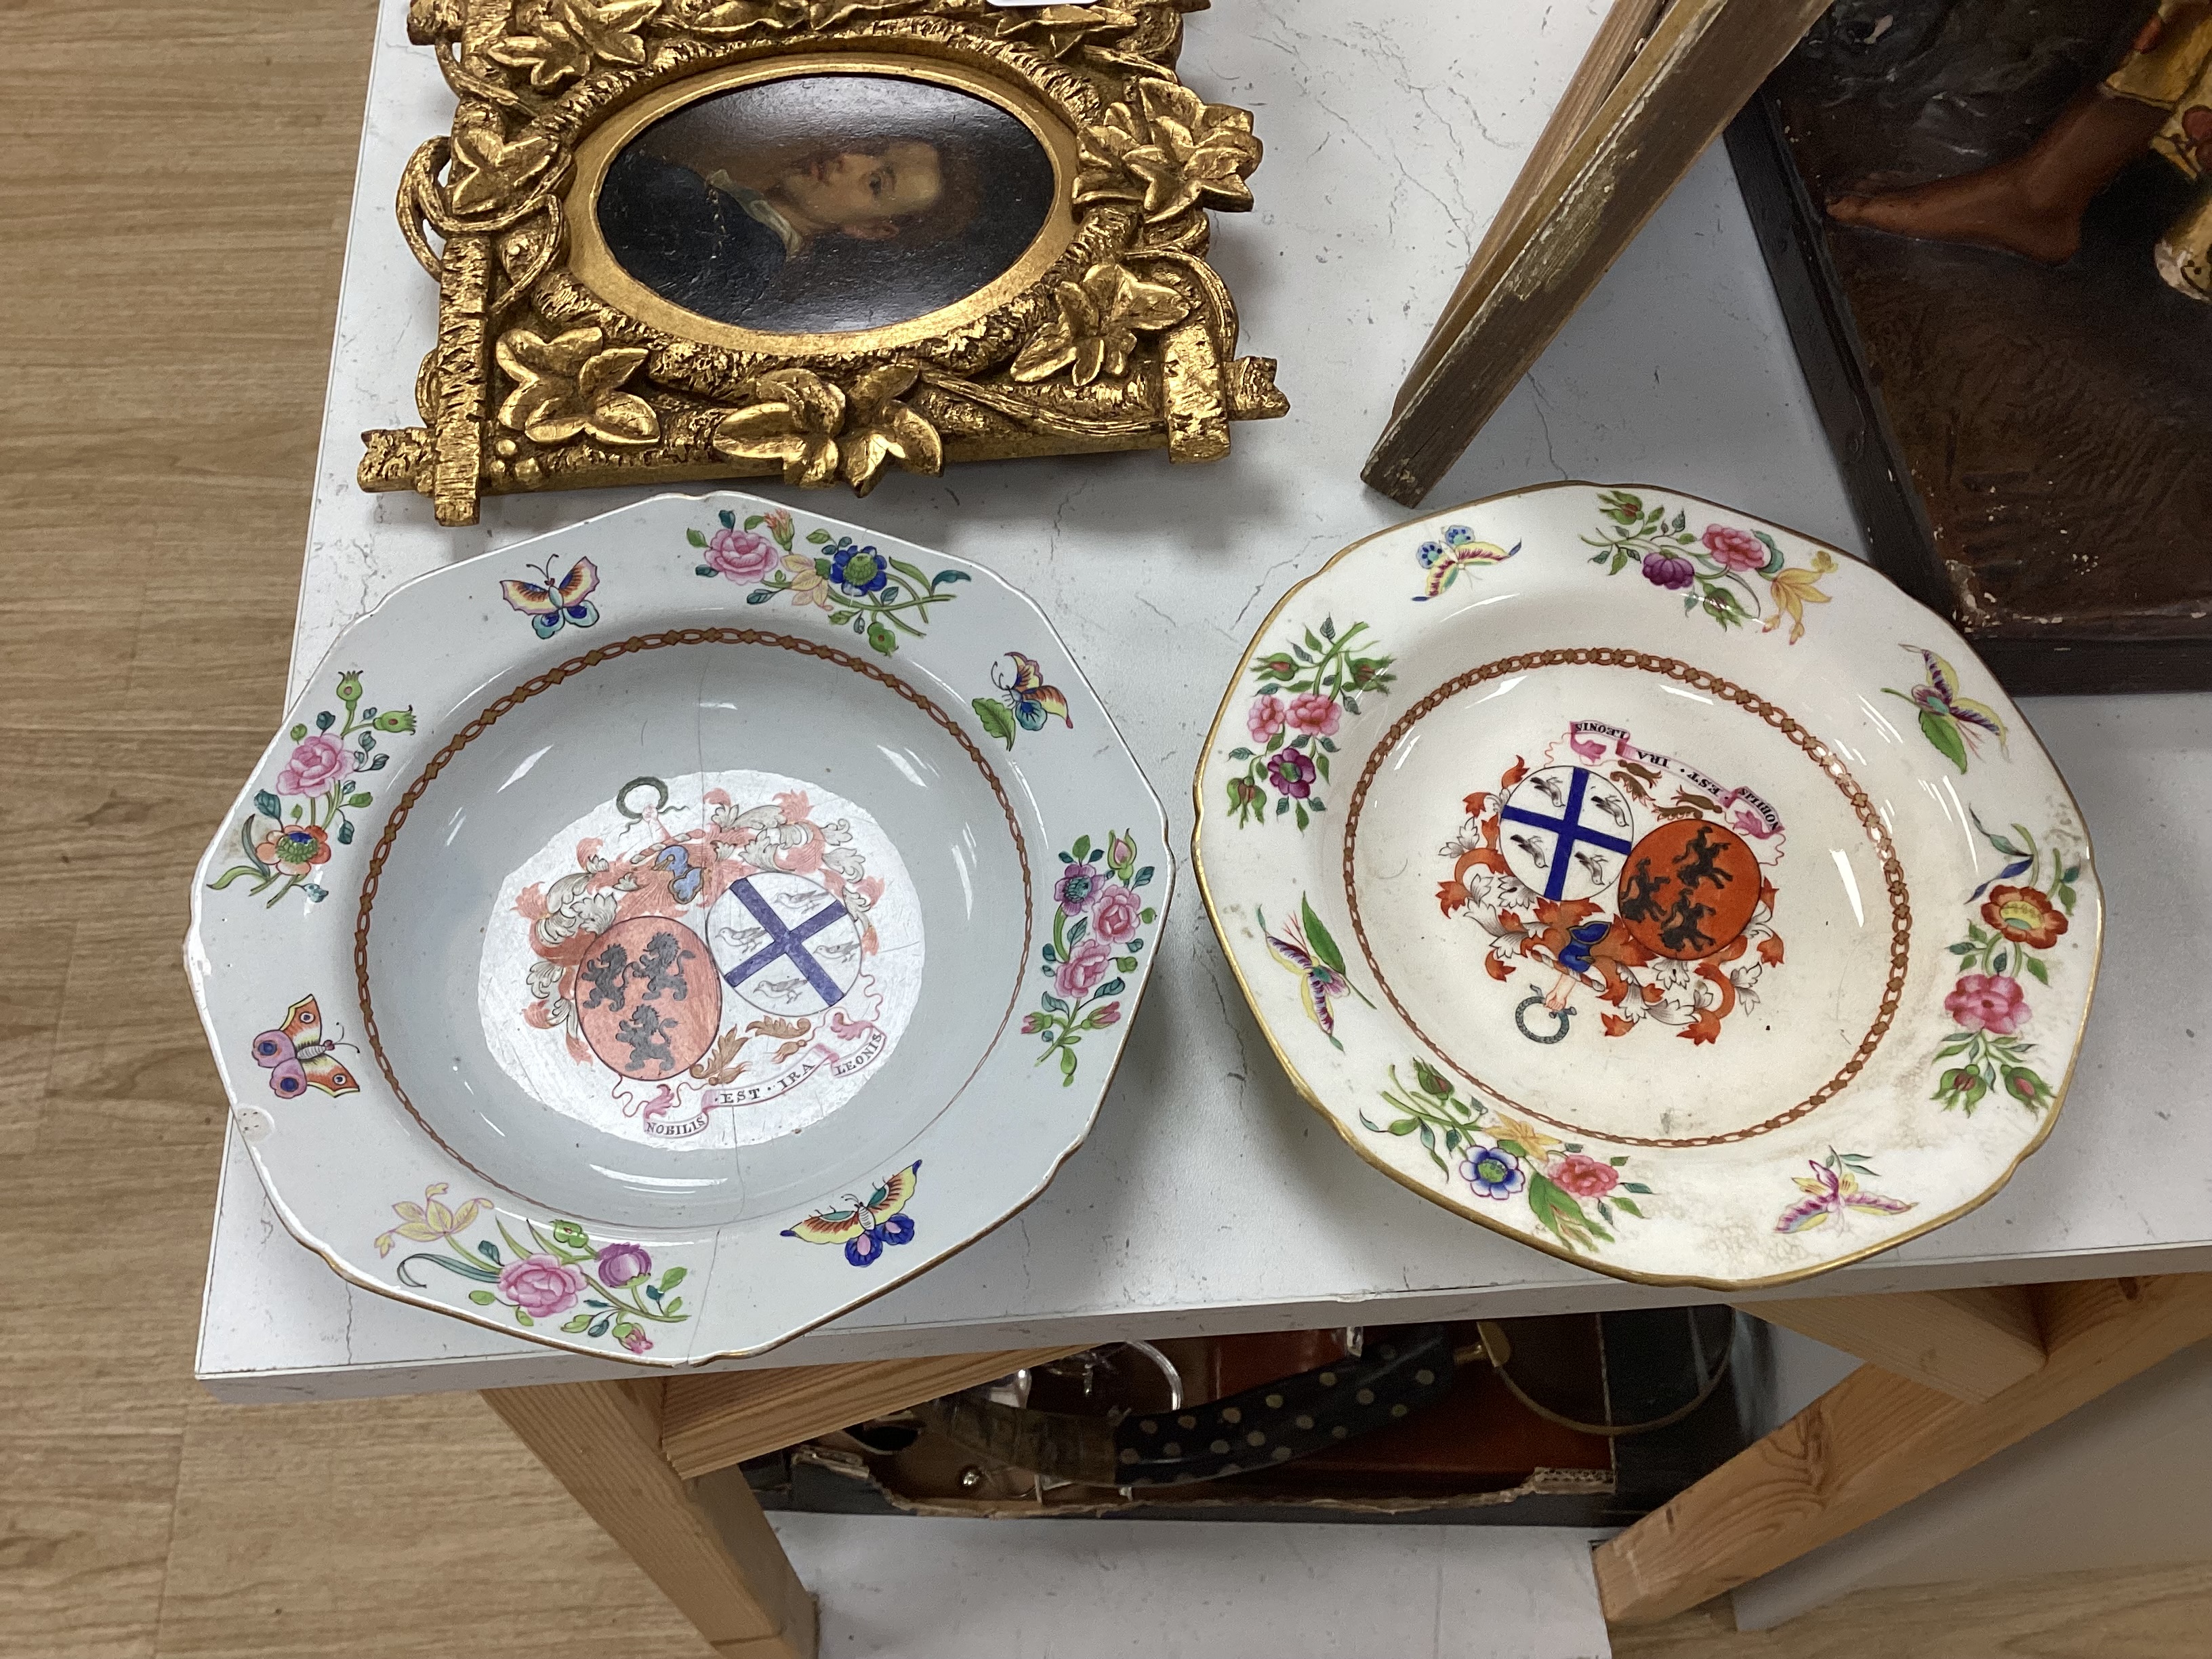 A group of Spode, Copeland & Garrett etc. stone china and porcelain armorial dinner wares, for Stuart of Bute, c.1820-50, The design in imitation of 18th century Chinese exports armorial wares, largest 28cm wide